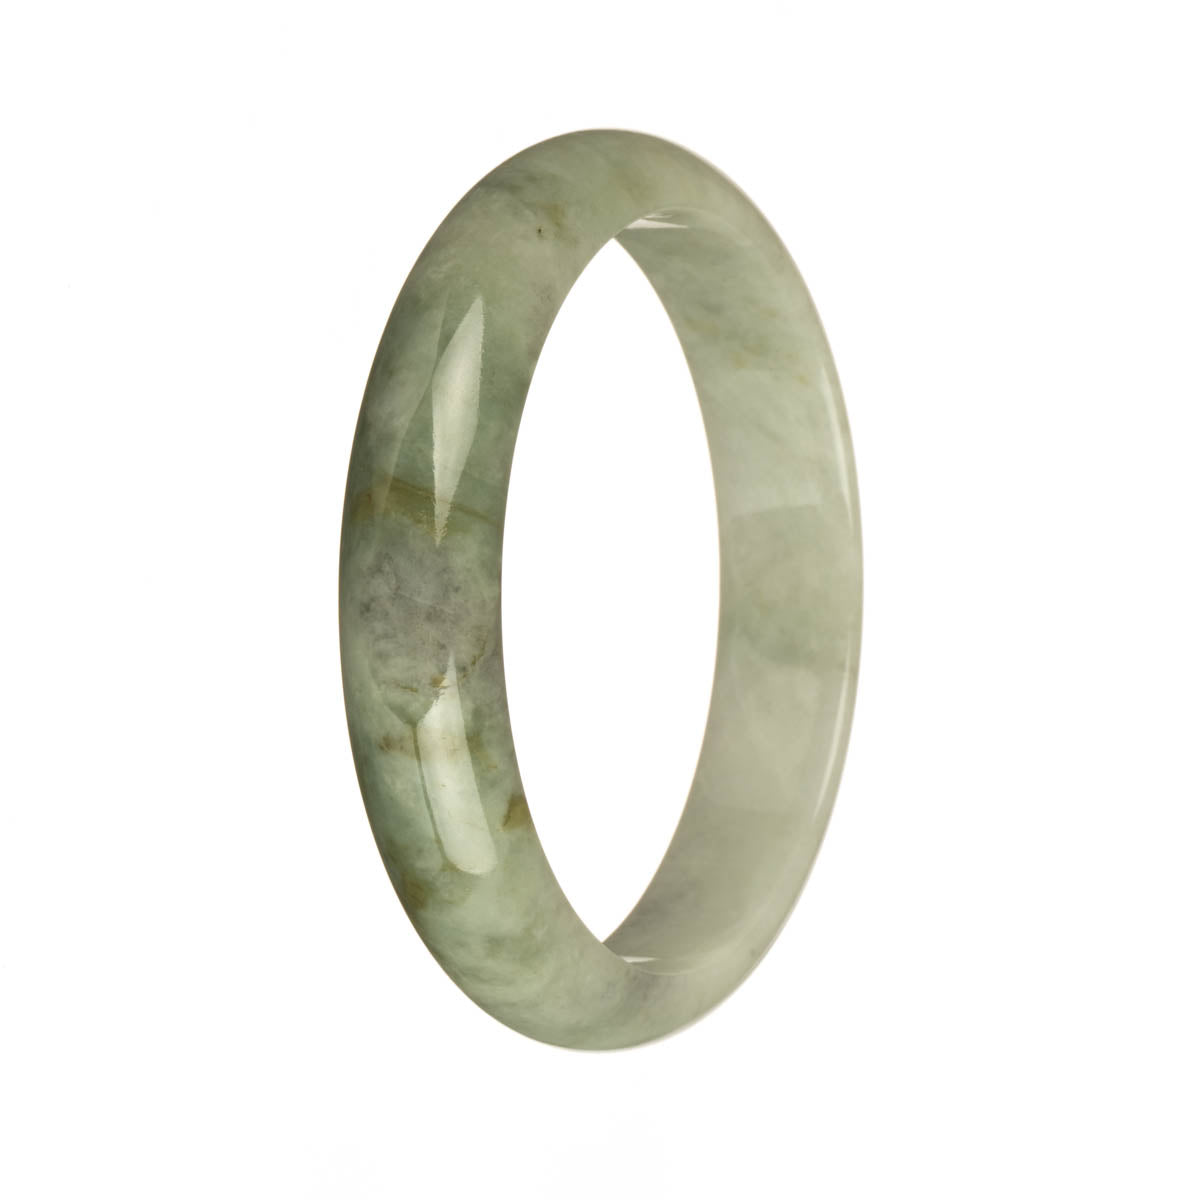 Genuine Grade A White and Light Grey with Brown and Green Patterns Burma Jade Bangle Bracelet - 59mm Half Moon